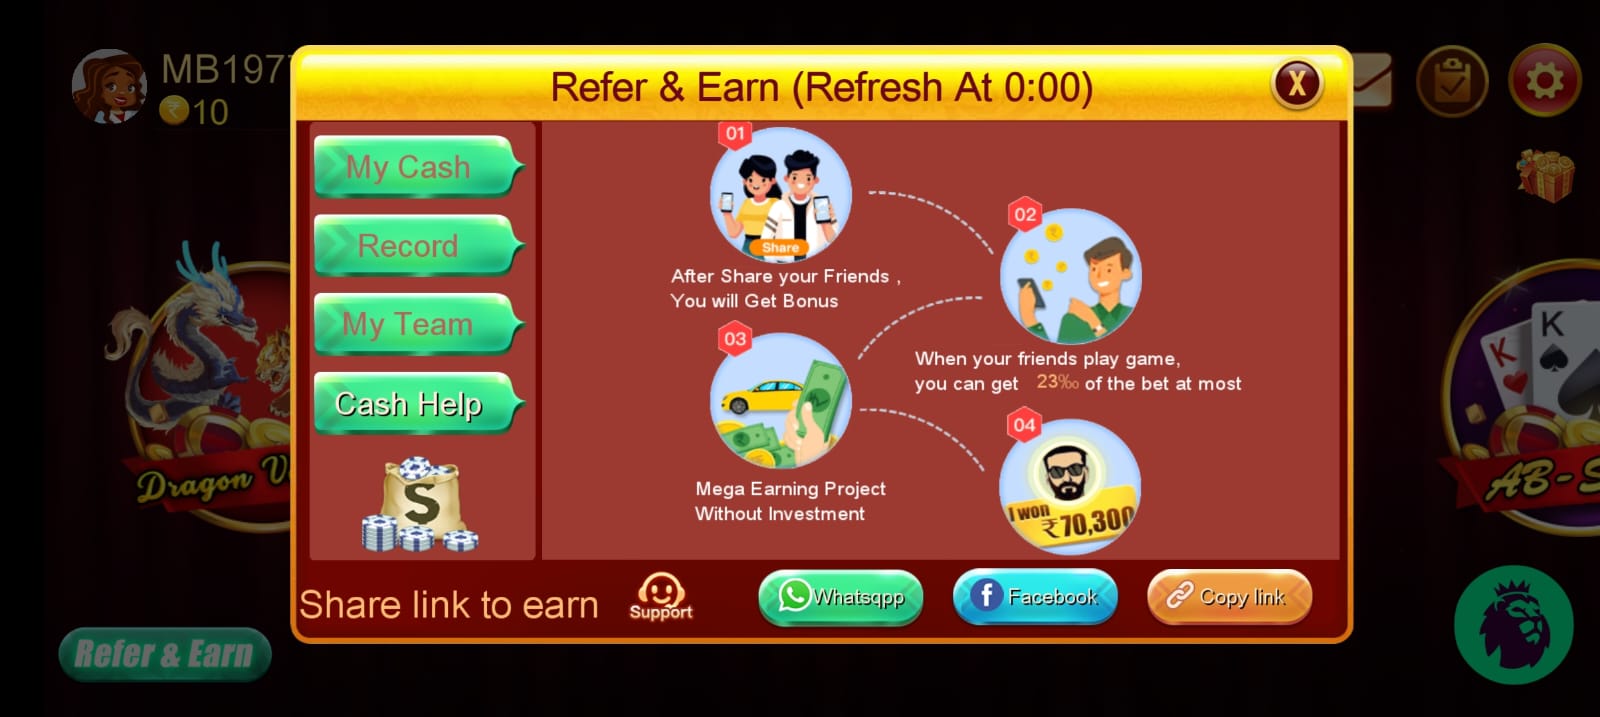 REFER AND EARN IN 3 PATTI KASH APP